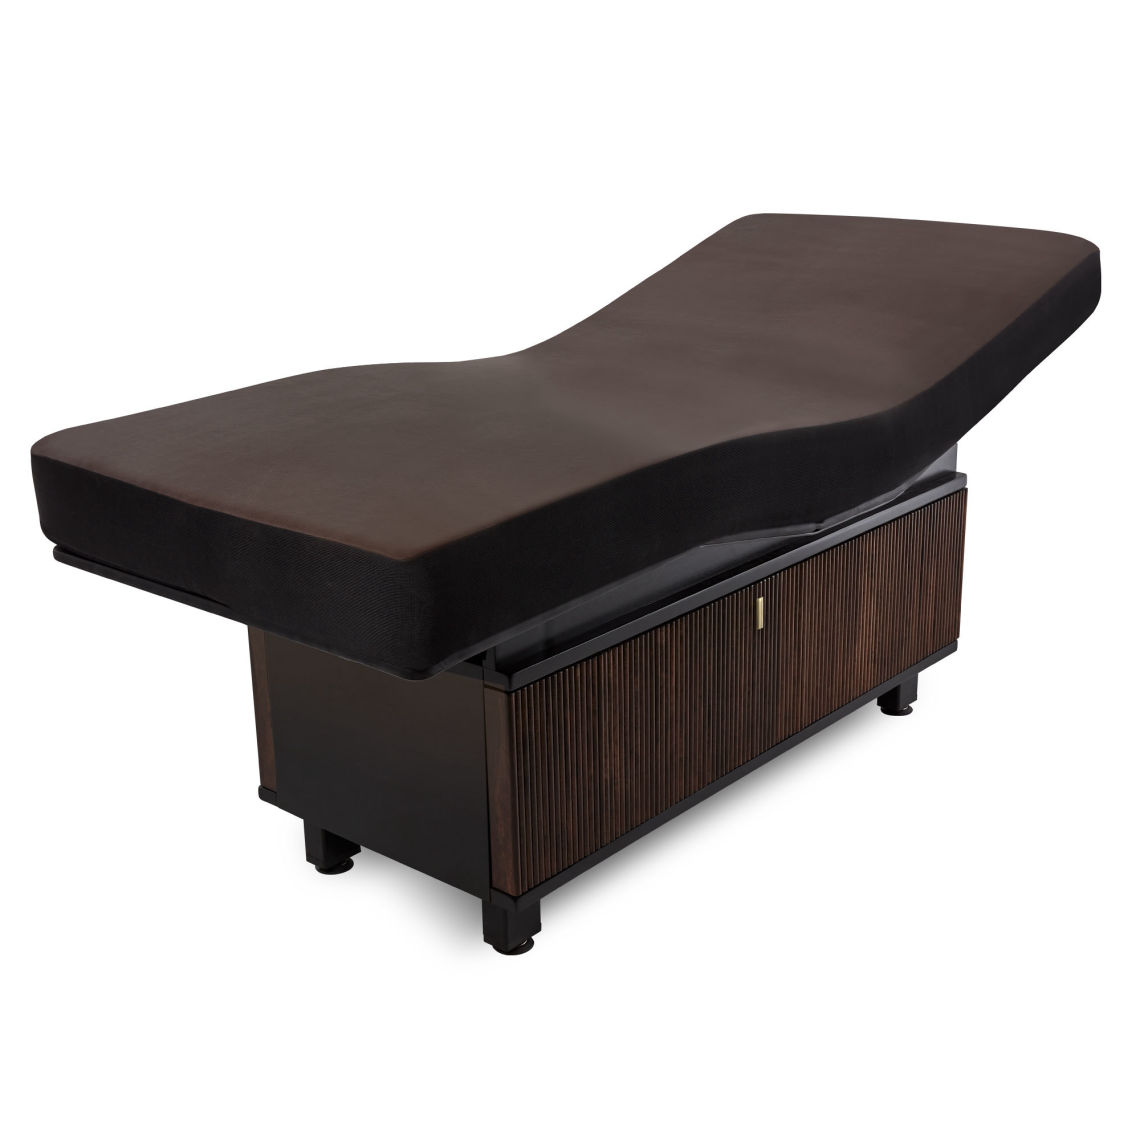 Spavision | Insignia Waverley™ Multi-purpose treatment table with replaceable mattress